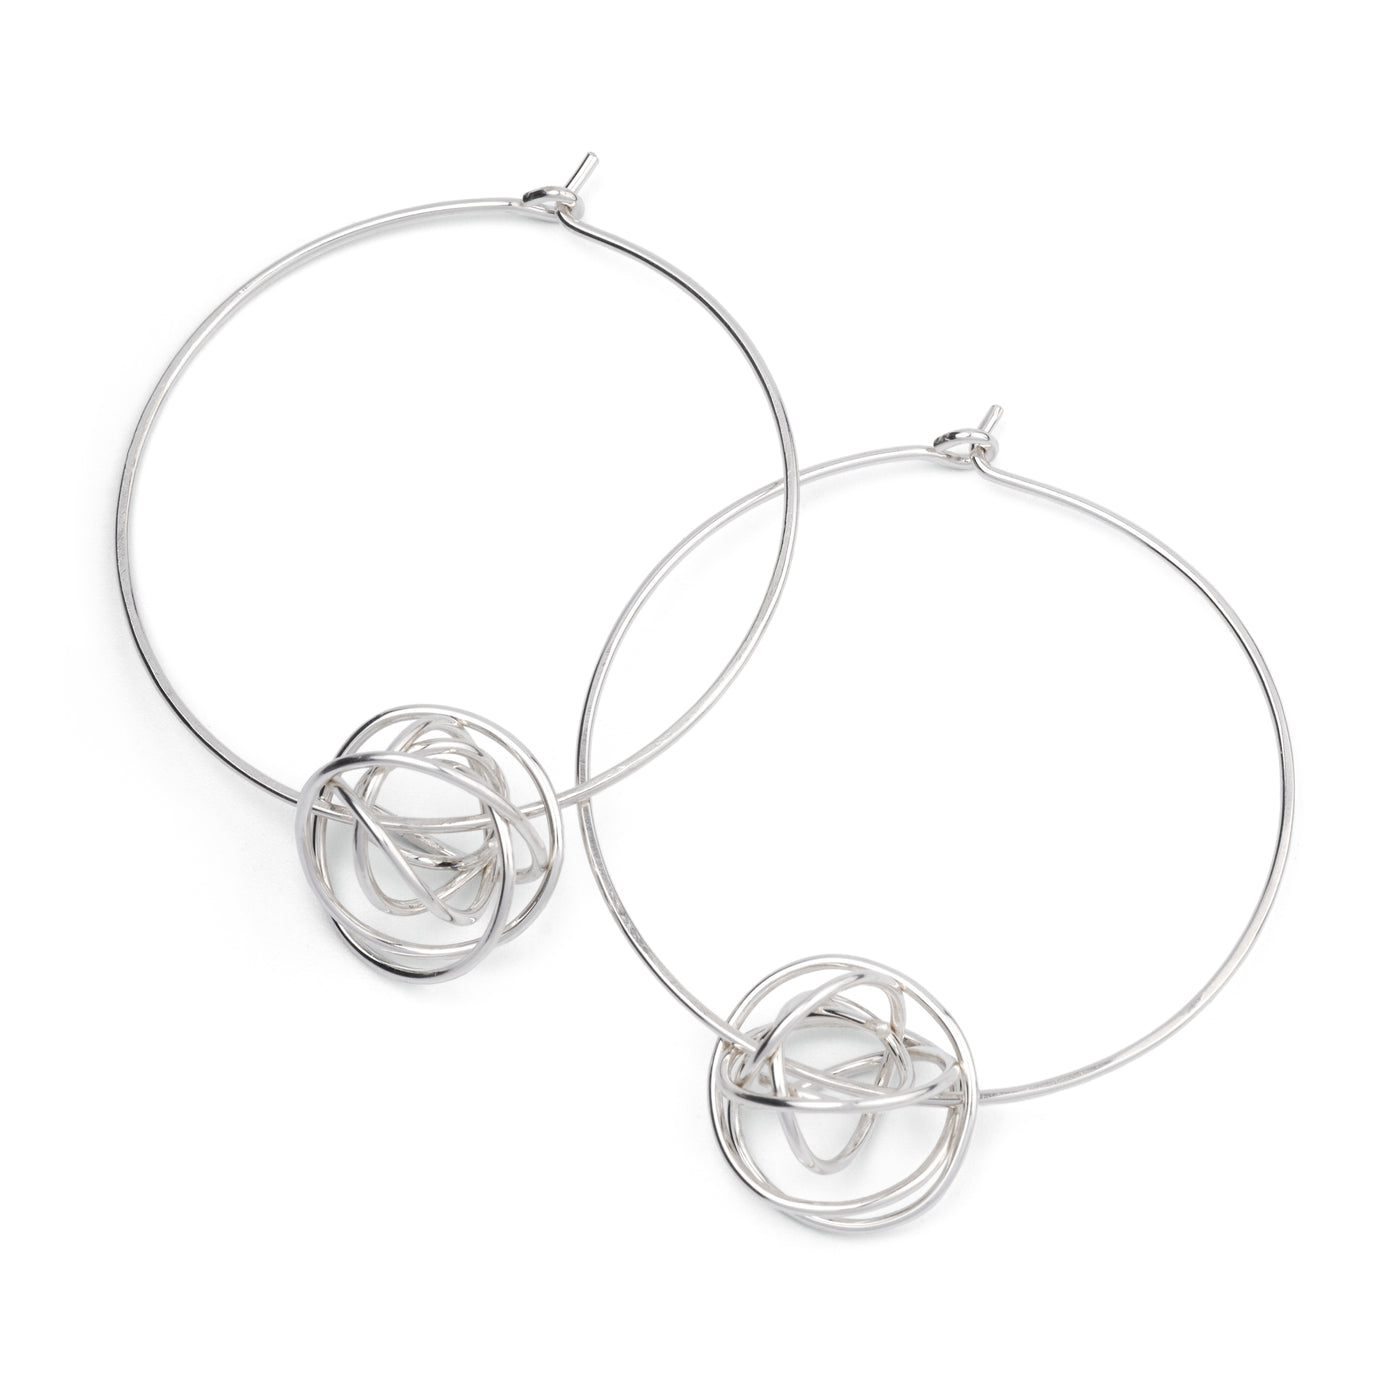 An image of the Scribble Bead Hoops